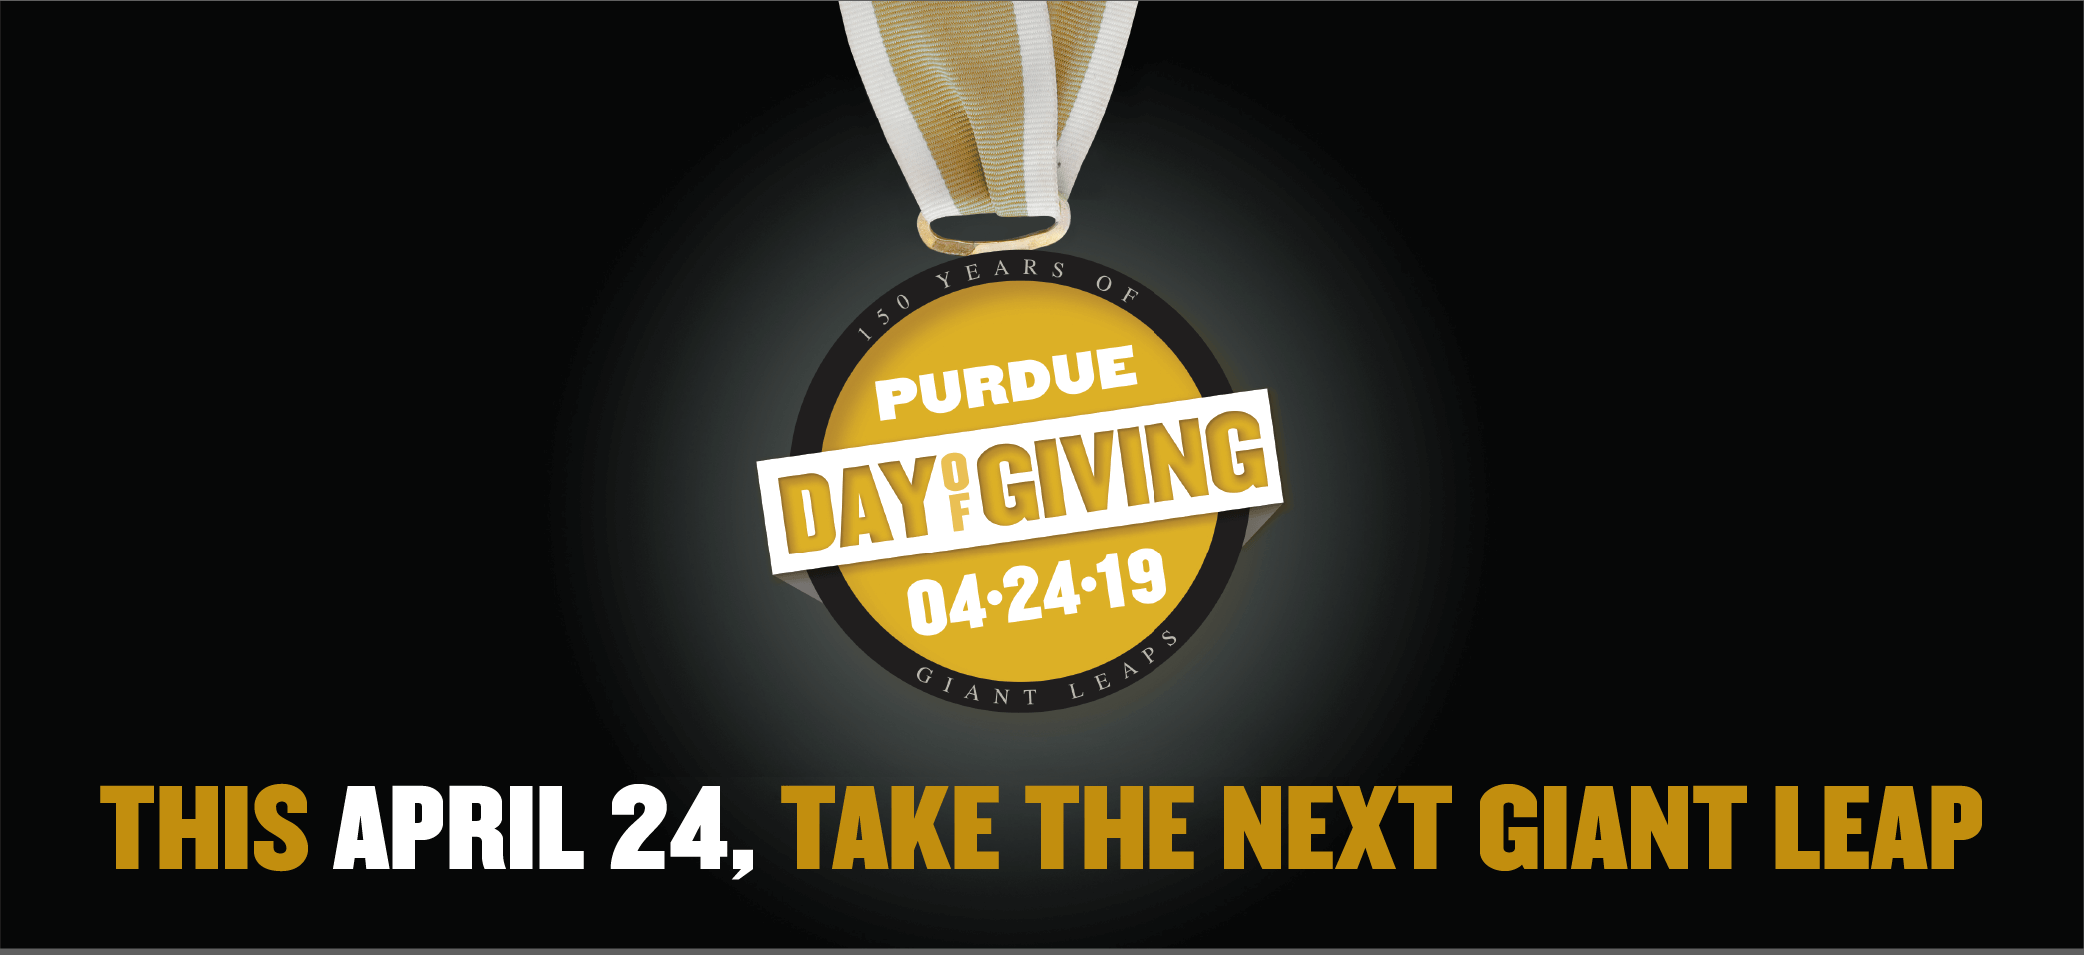 Purdue Day of Giving The Military Family Research Institute at Purdue